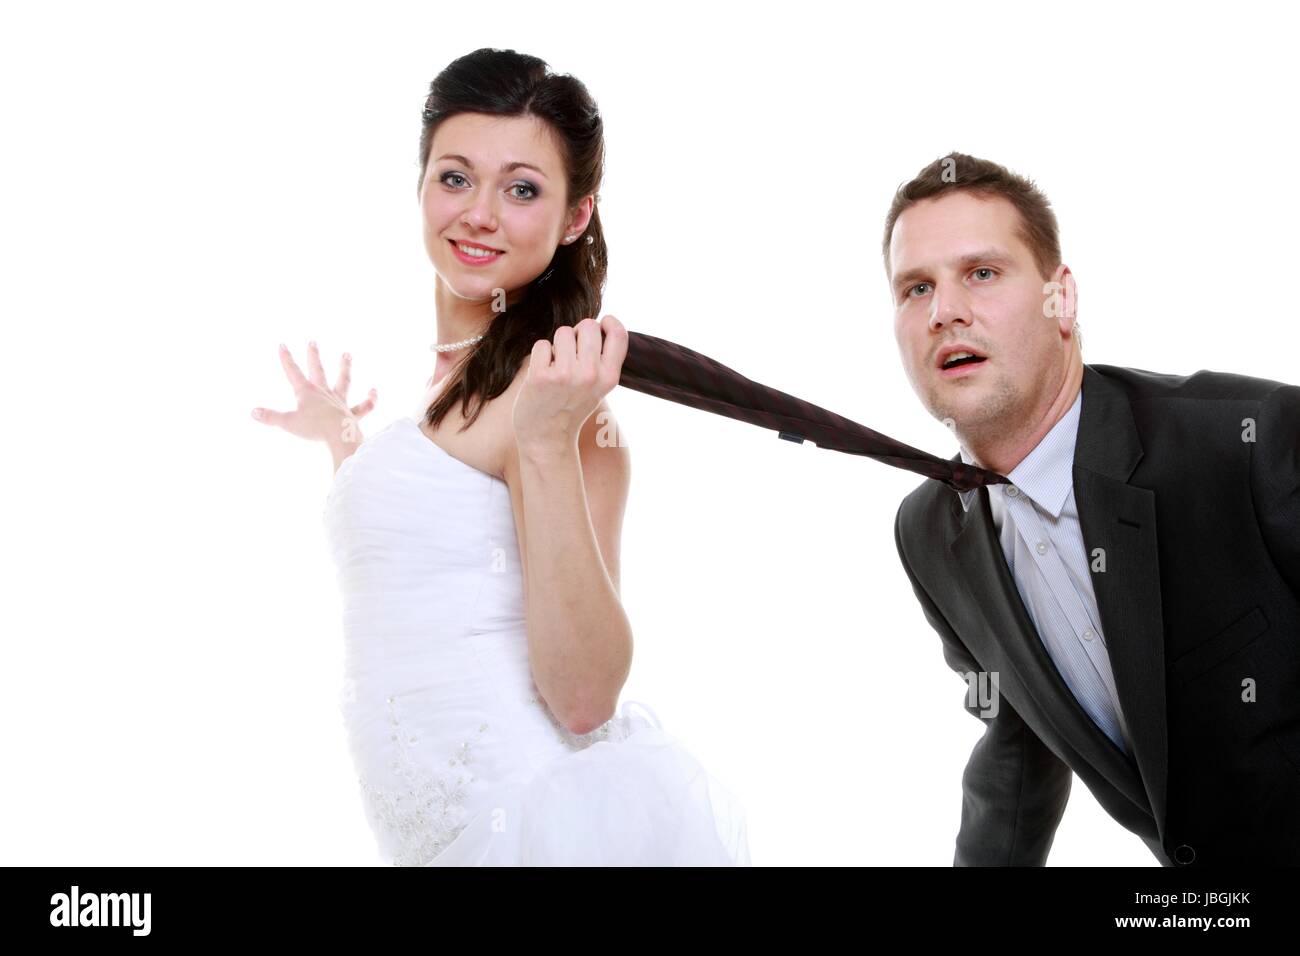 Emancipation idea concept. Humorous funny wedding couple bride and groom -  woman pulling the tie of a man, trying to show her domination, isolated  Stock Photo - Alamy